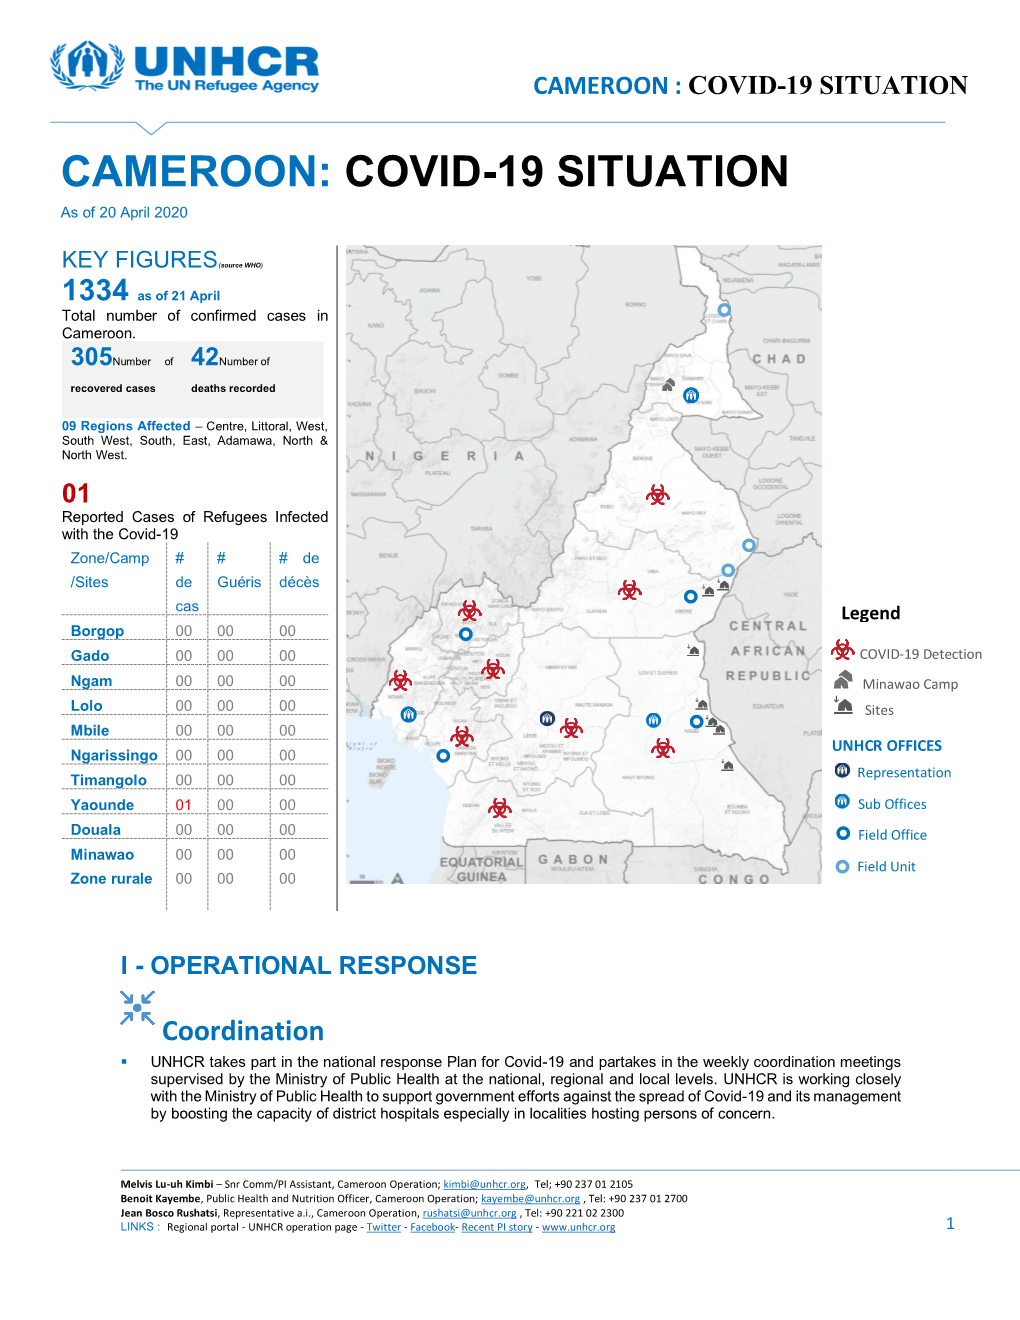 Cameroon : Covid-19 Situation